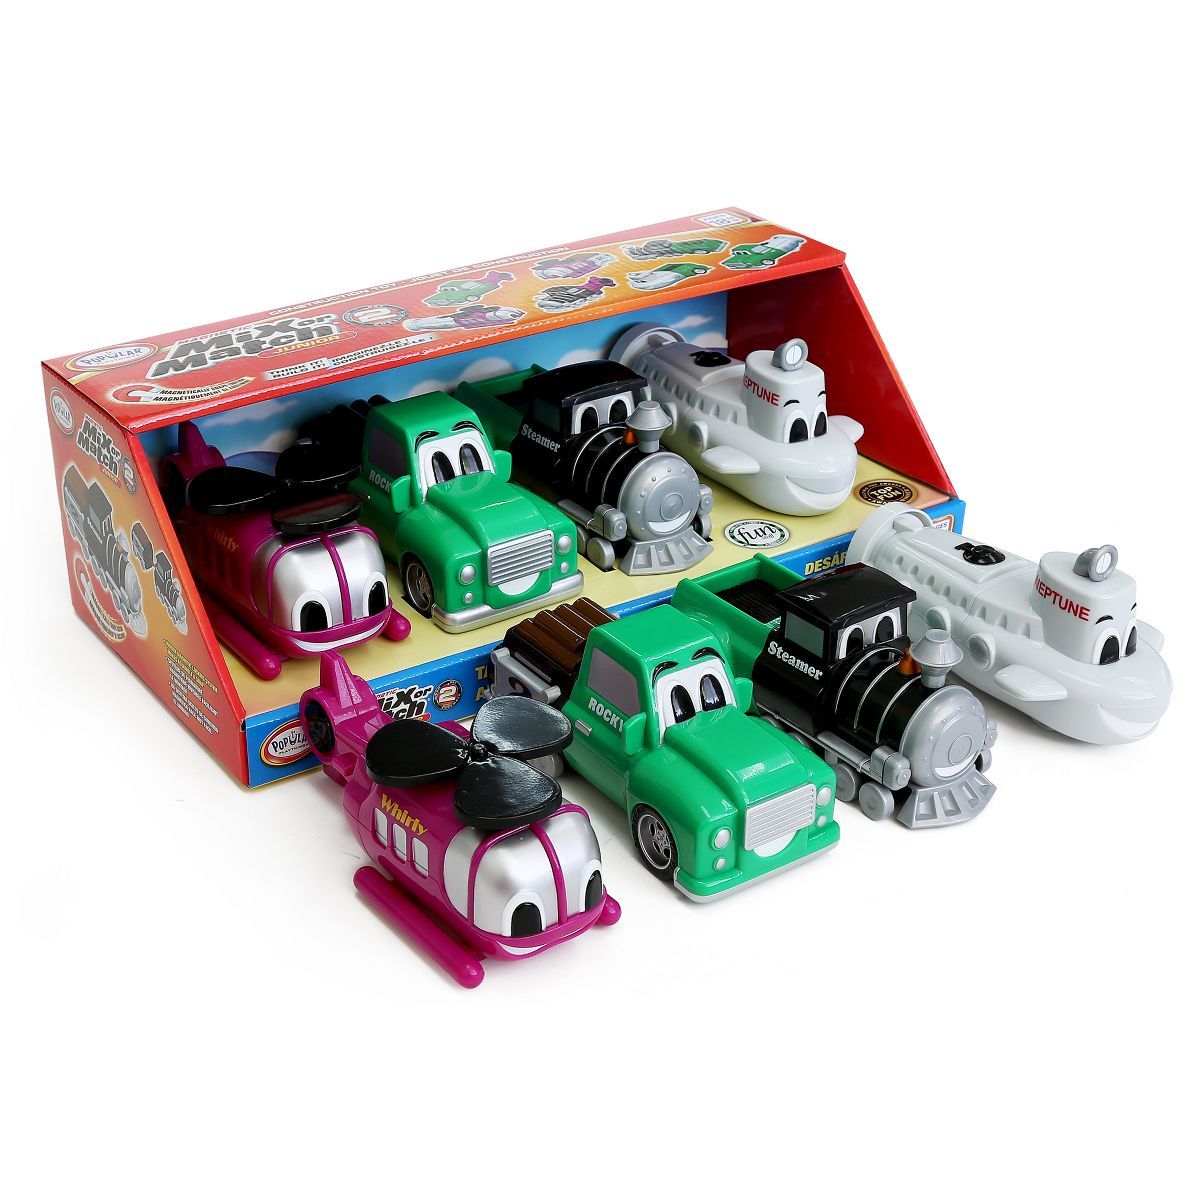 Popular Playthings Magnetic Mix or Match Junior 2 | Target